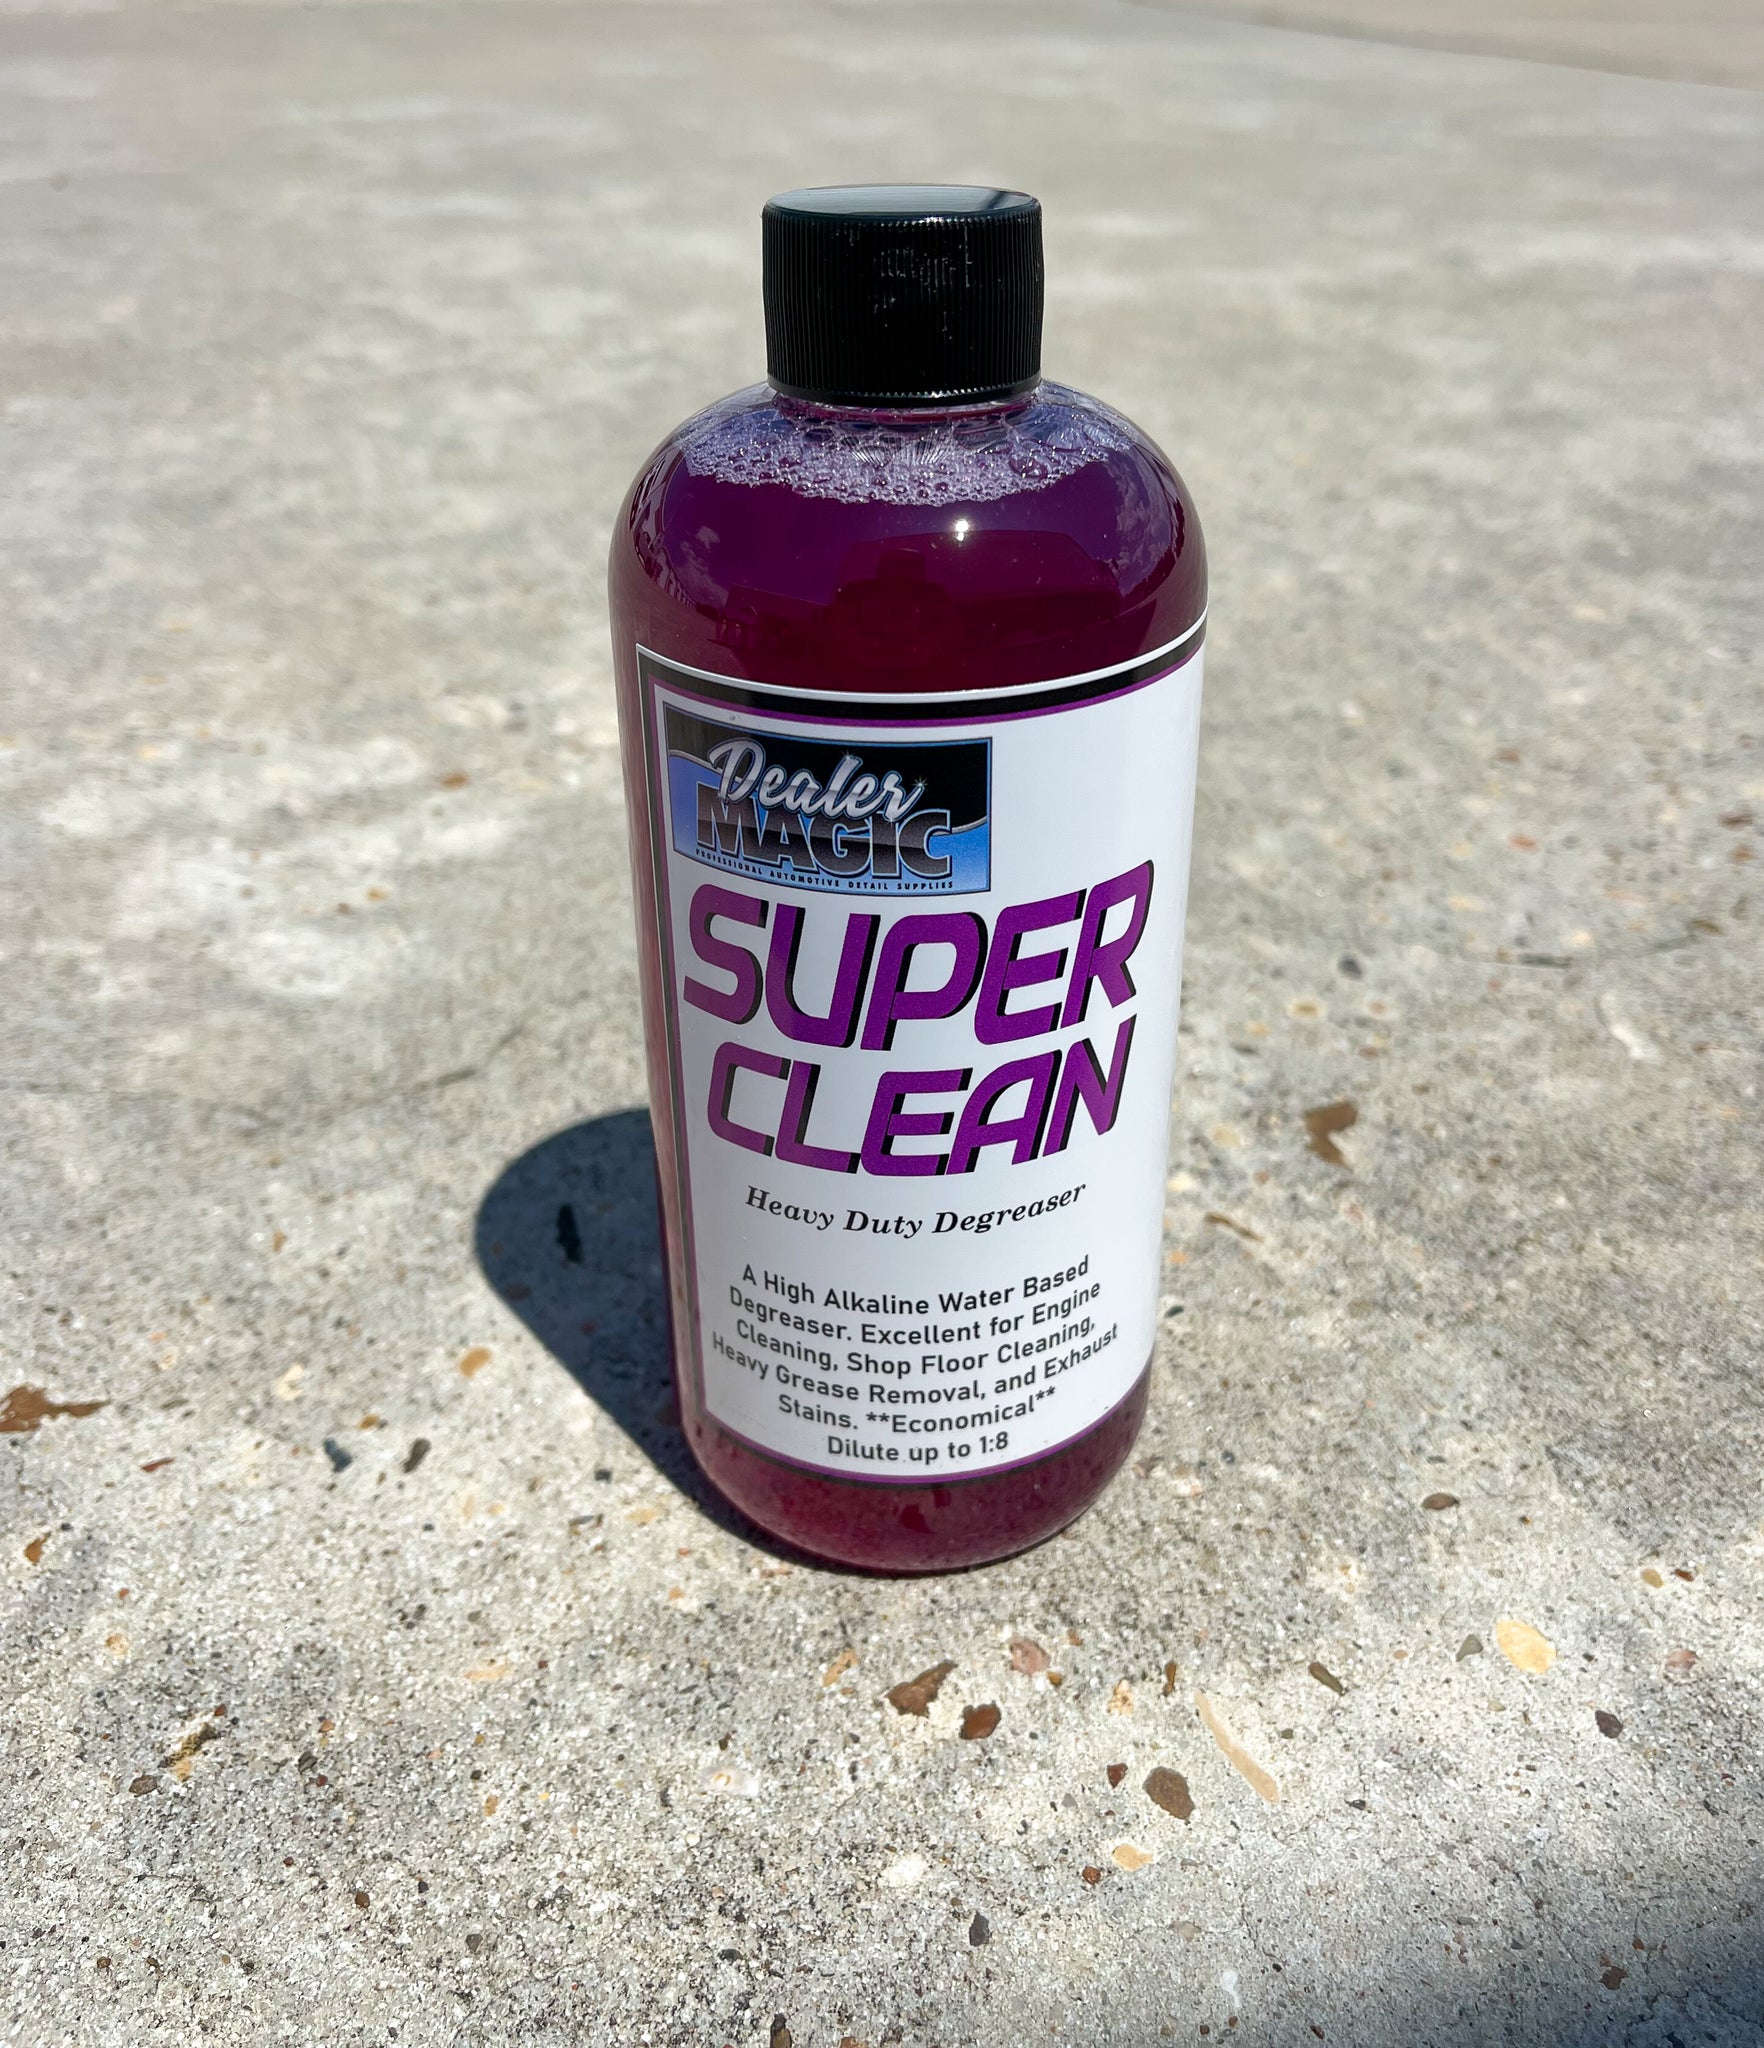 Superclean Cleaner/Degreaser, 1 Gal